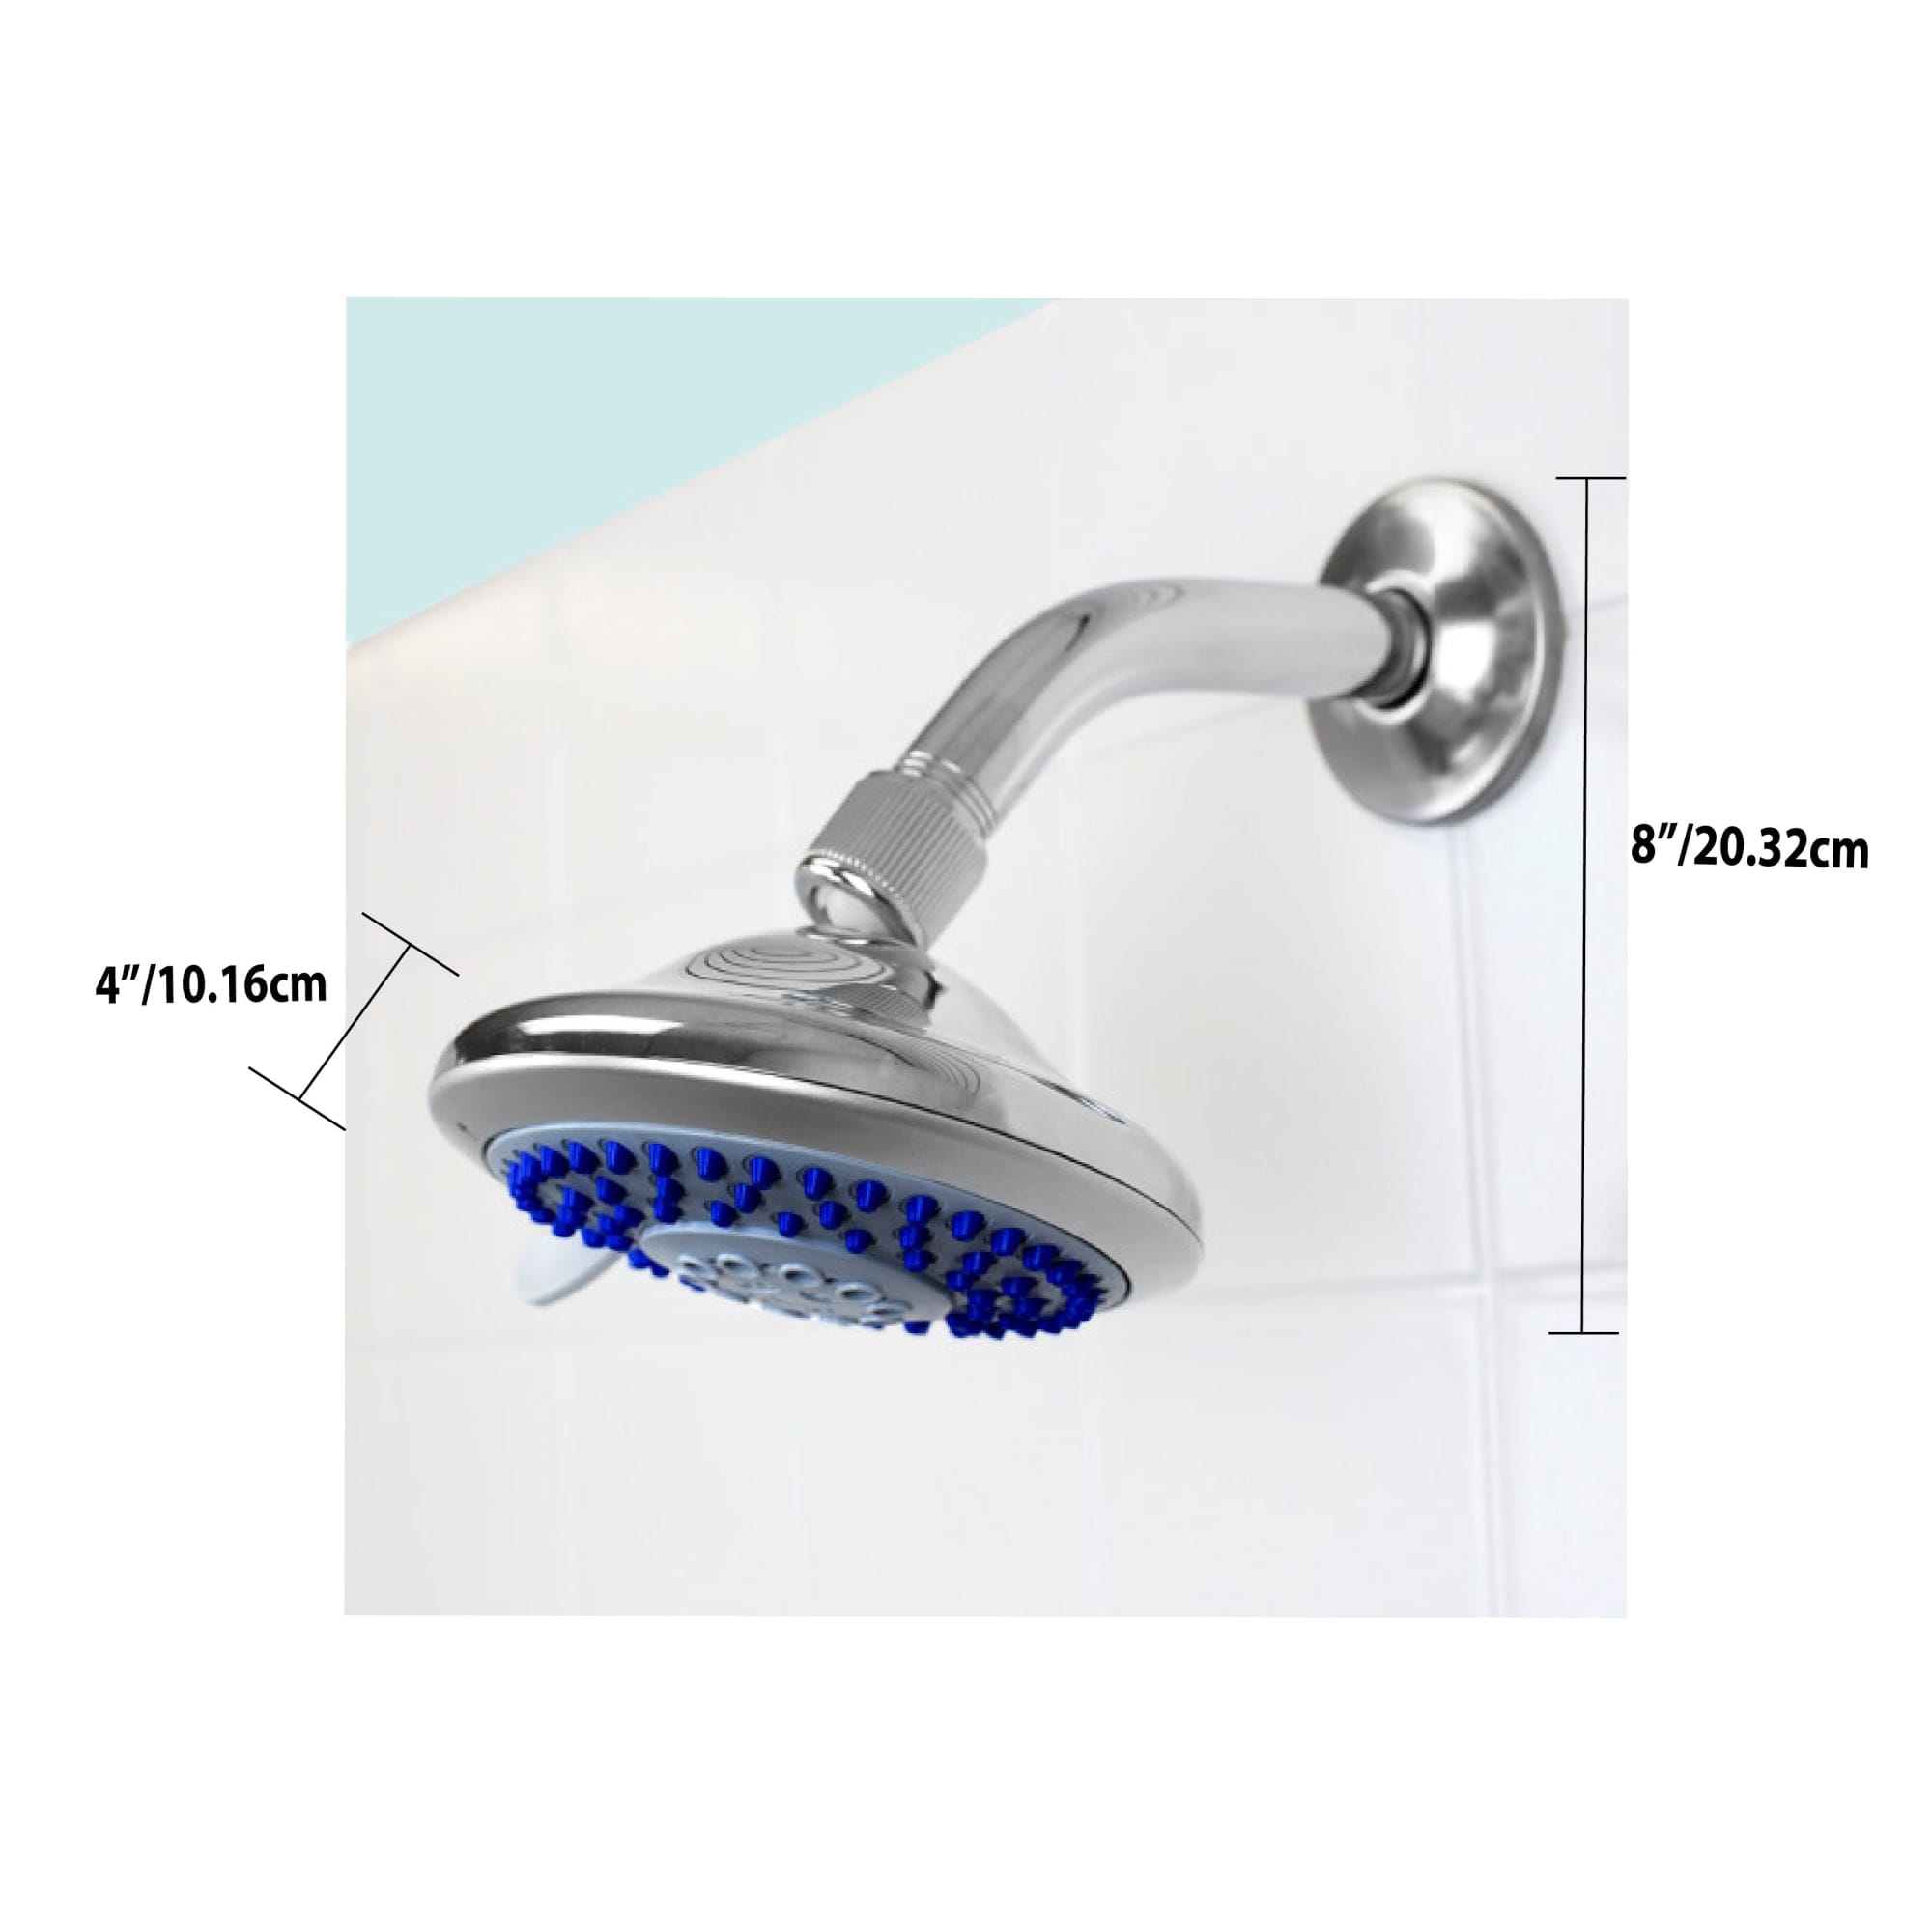 Home Basics  Luxury Retreat Fixed 5 Function Shower Head, Chrome $8.00 EACH, CASE PACK OF 12